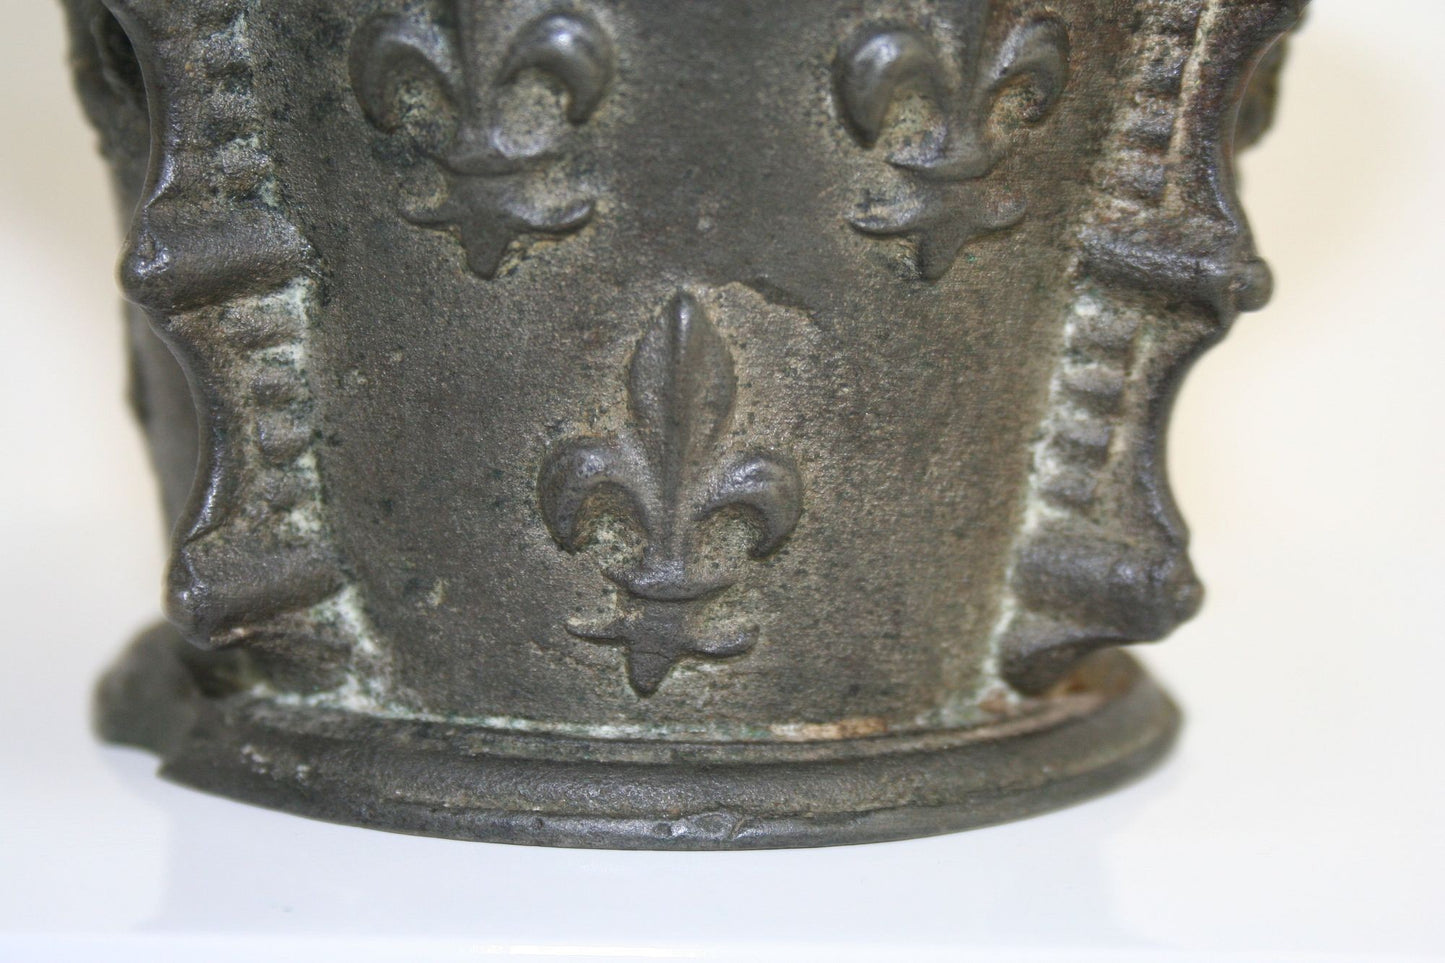 French Bronze Mortar, Early 17th Century